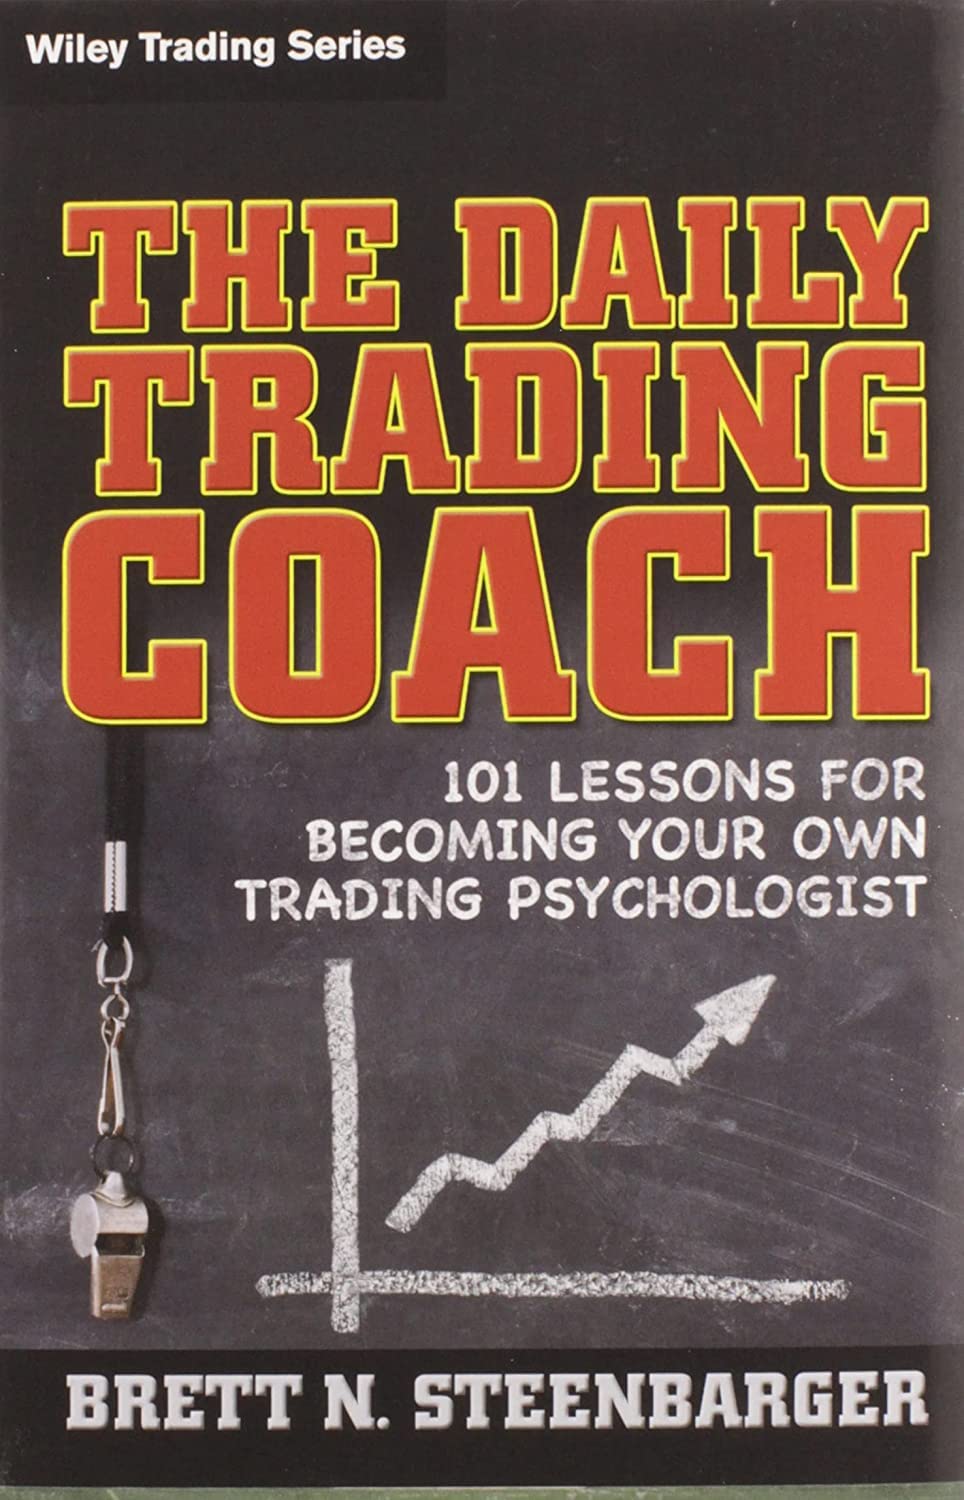 The Daily Trading Coach: 101 Lessons for Becoming Your Own Trading Psychologist, by Brett N. Steenbarger